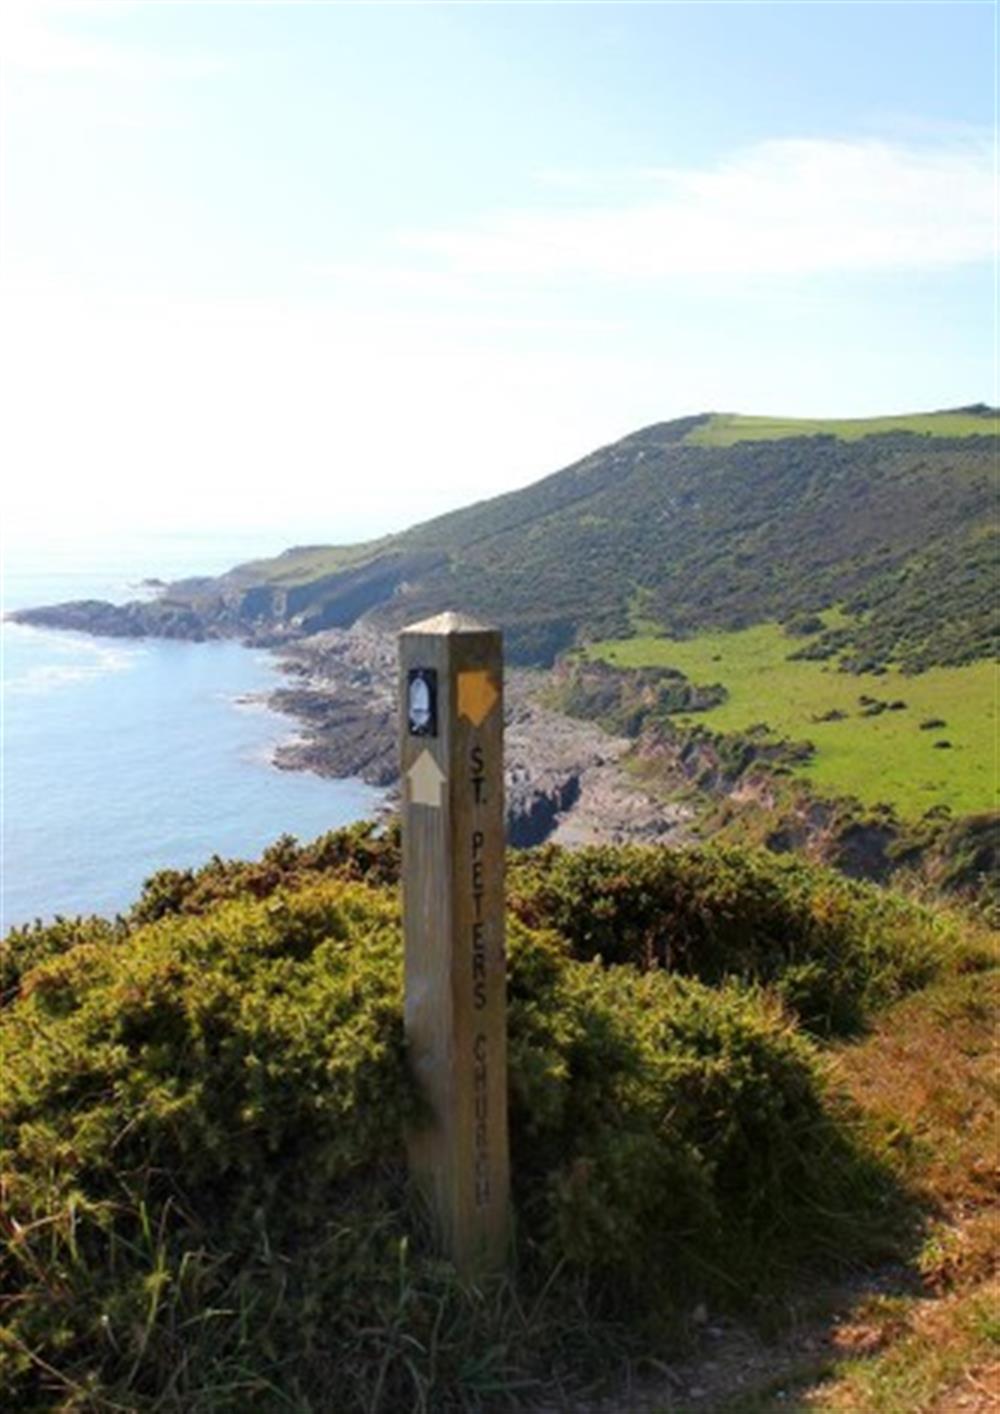 South West Coastal Path runs immediately by the properties